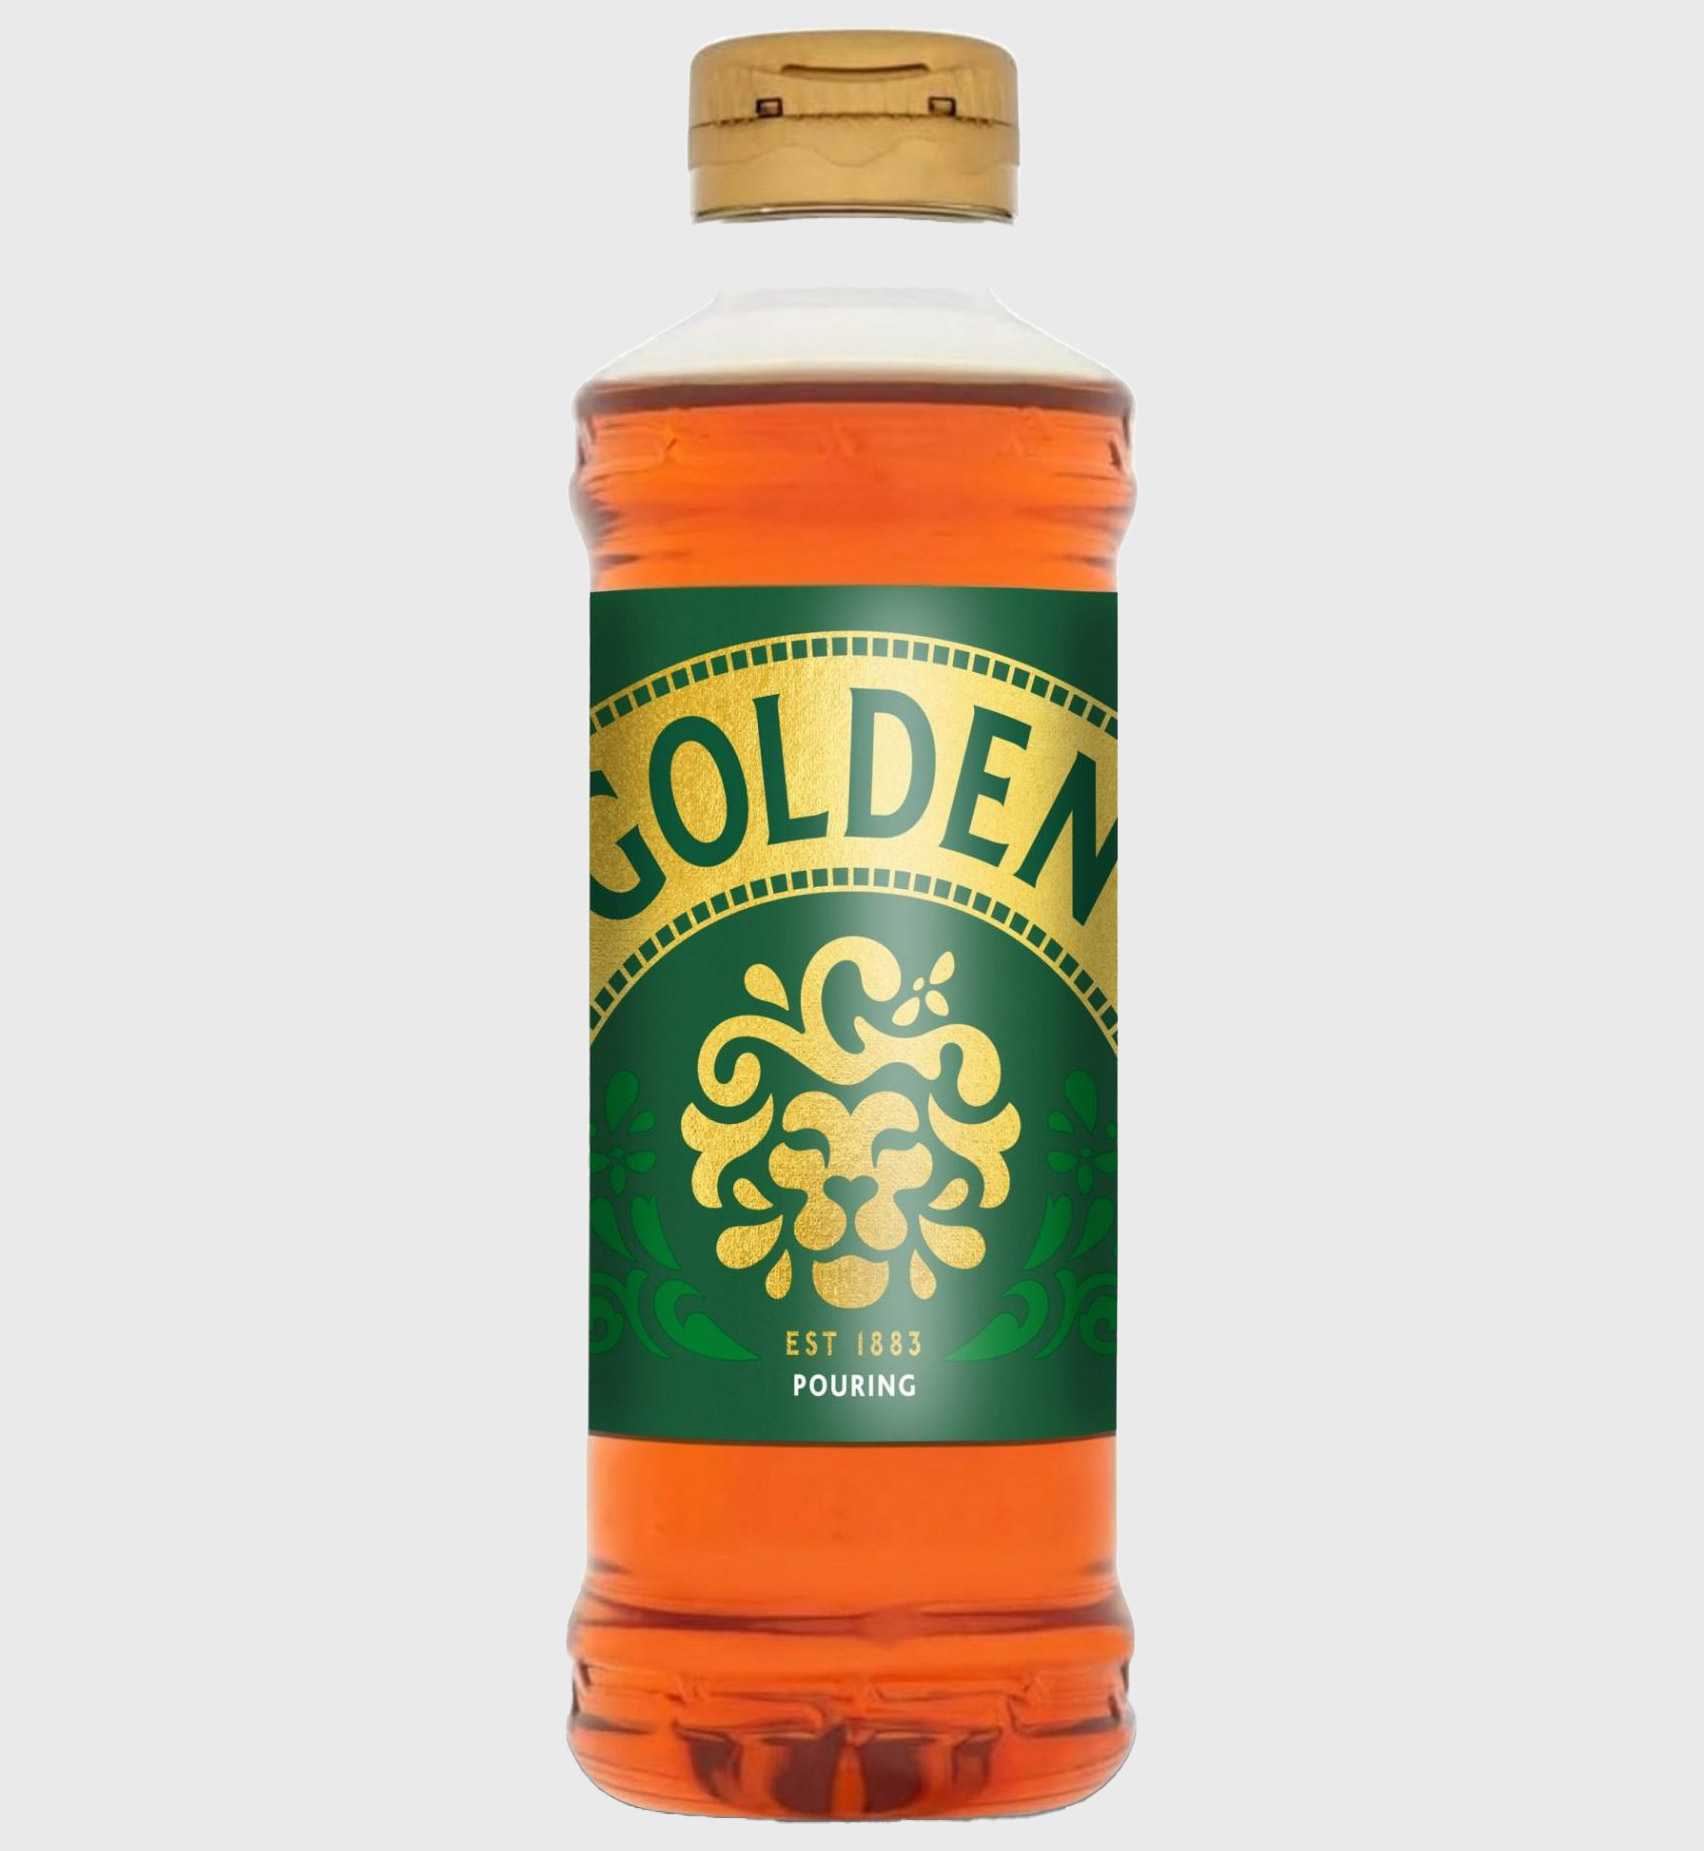 Tate and Lyle's Golden Syrup rebrand